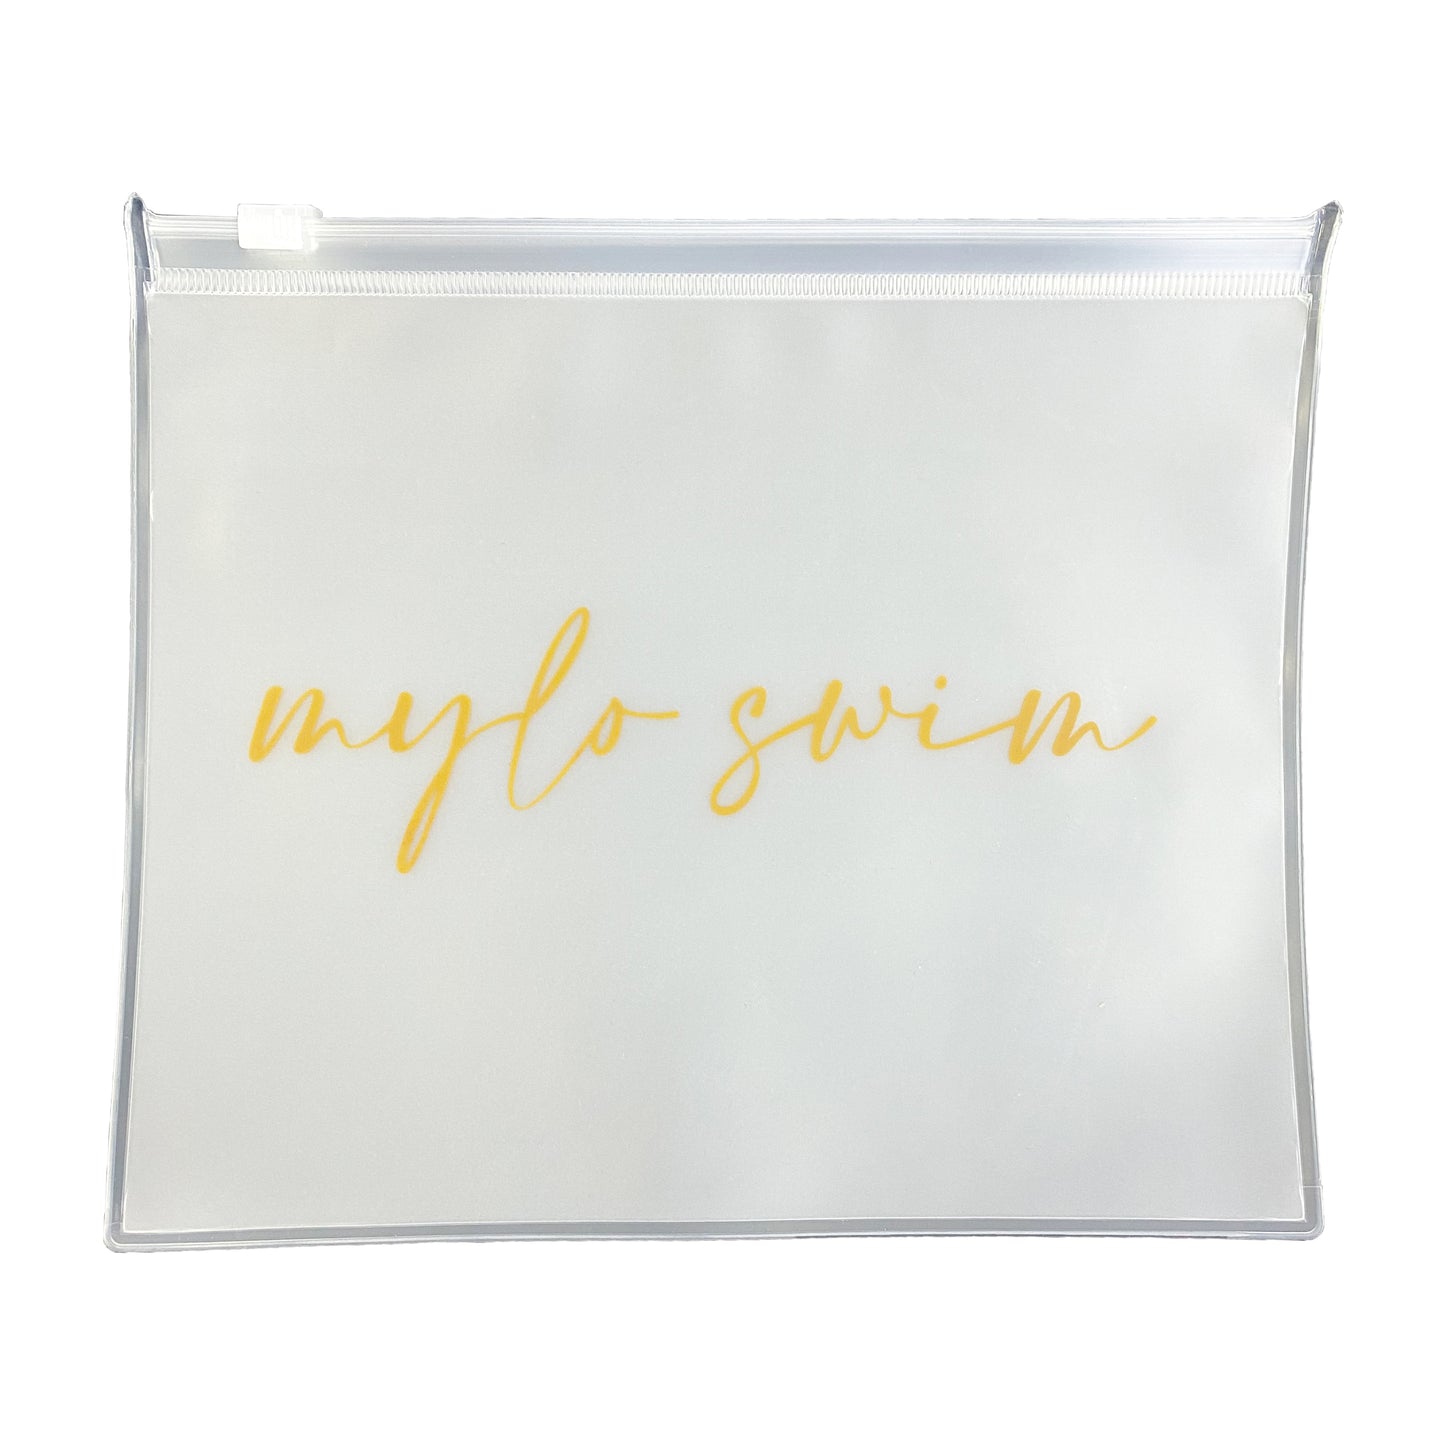 Biodegradable ziploc pouch for wet swimwear or beach items. Pouch has mylo swim scripted in gold across. 